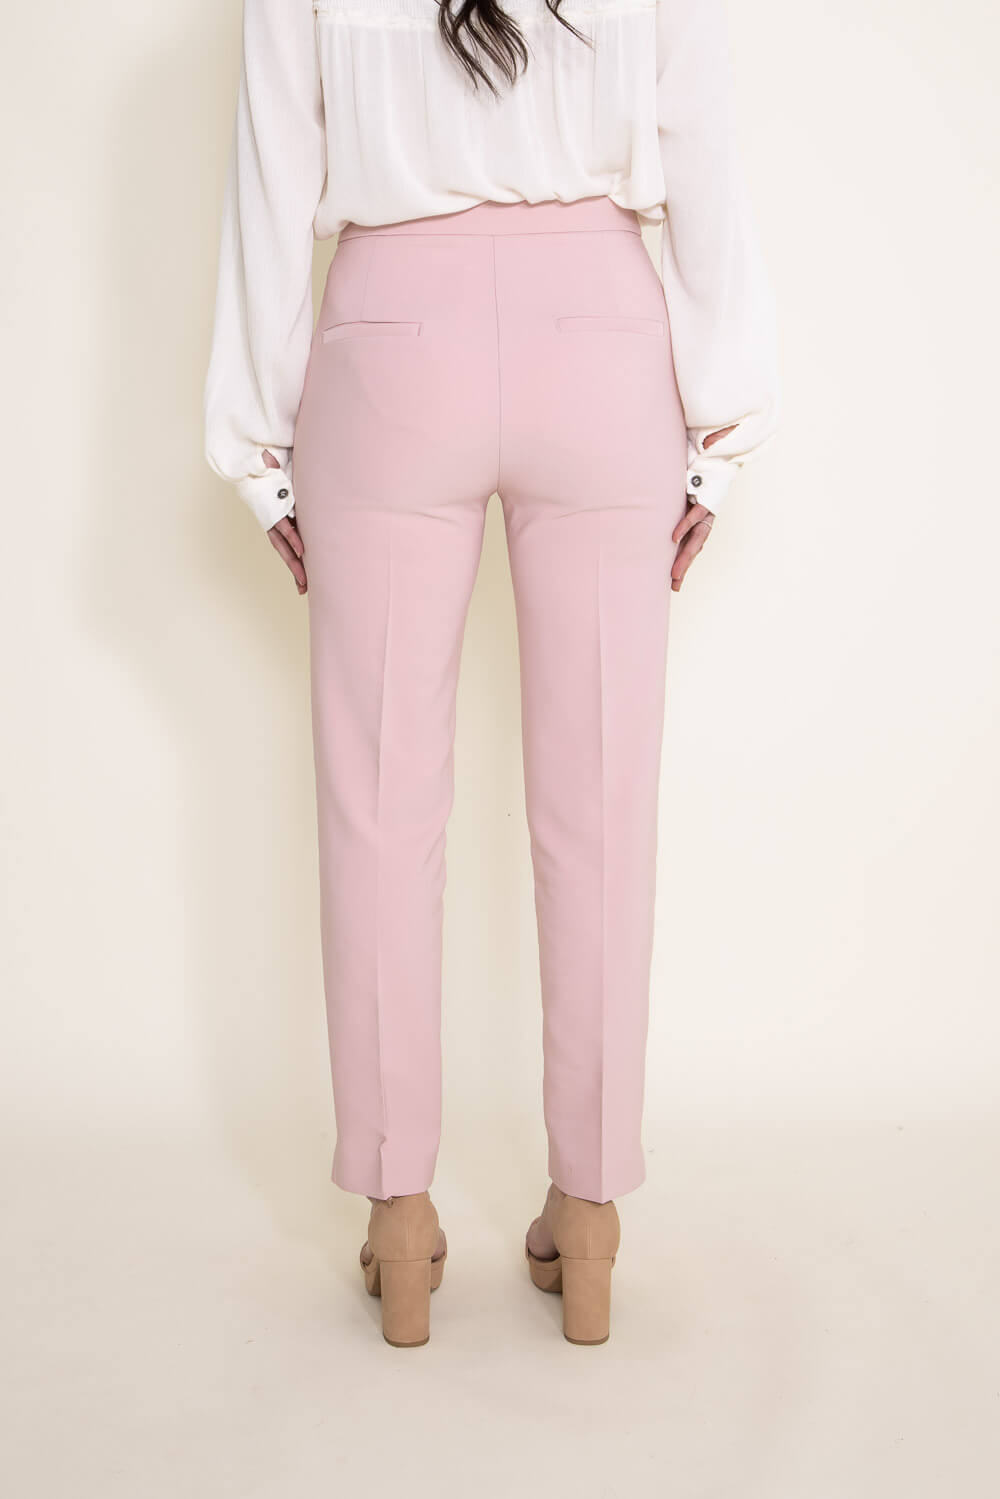 Business Casual Pants for Women High Waisted Bow Belted Suit Pants